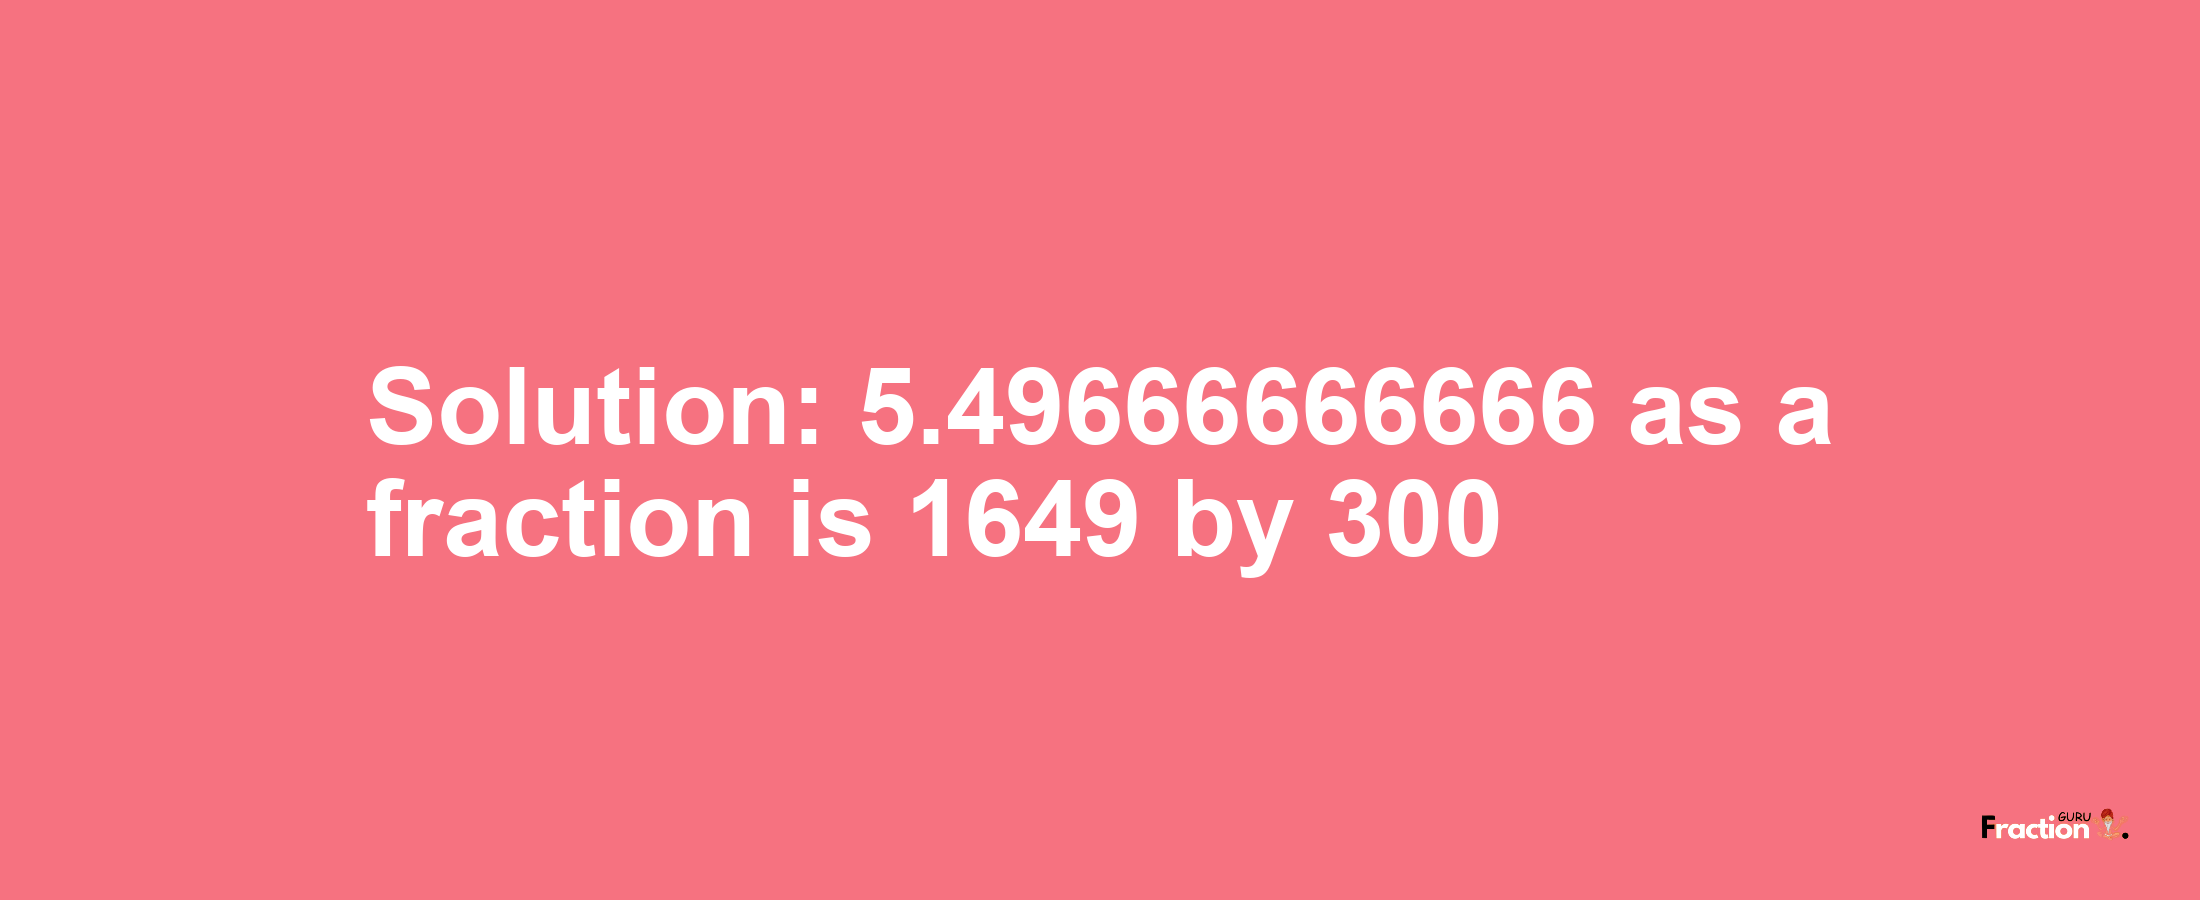 Solution:5.49666666666 as a fraction is 1649/300